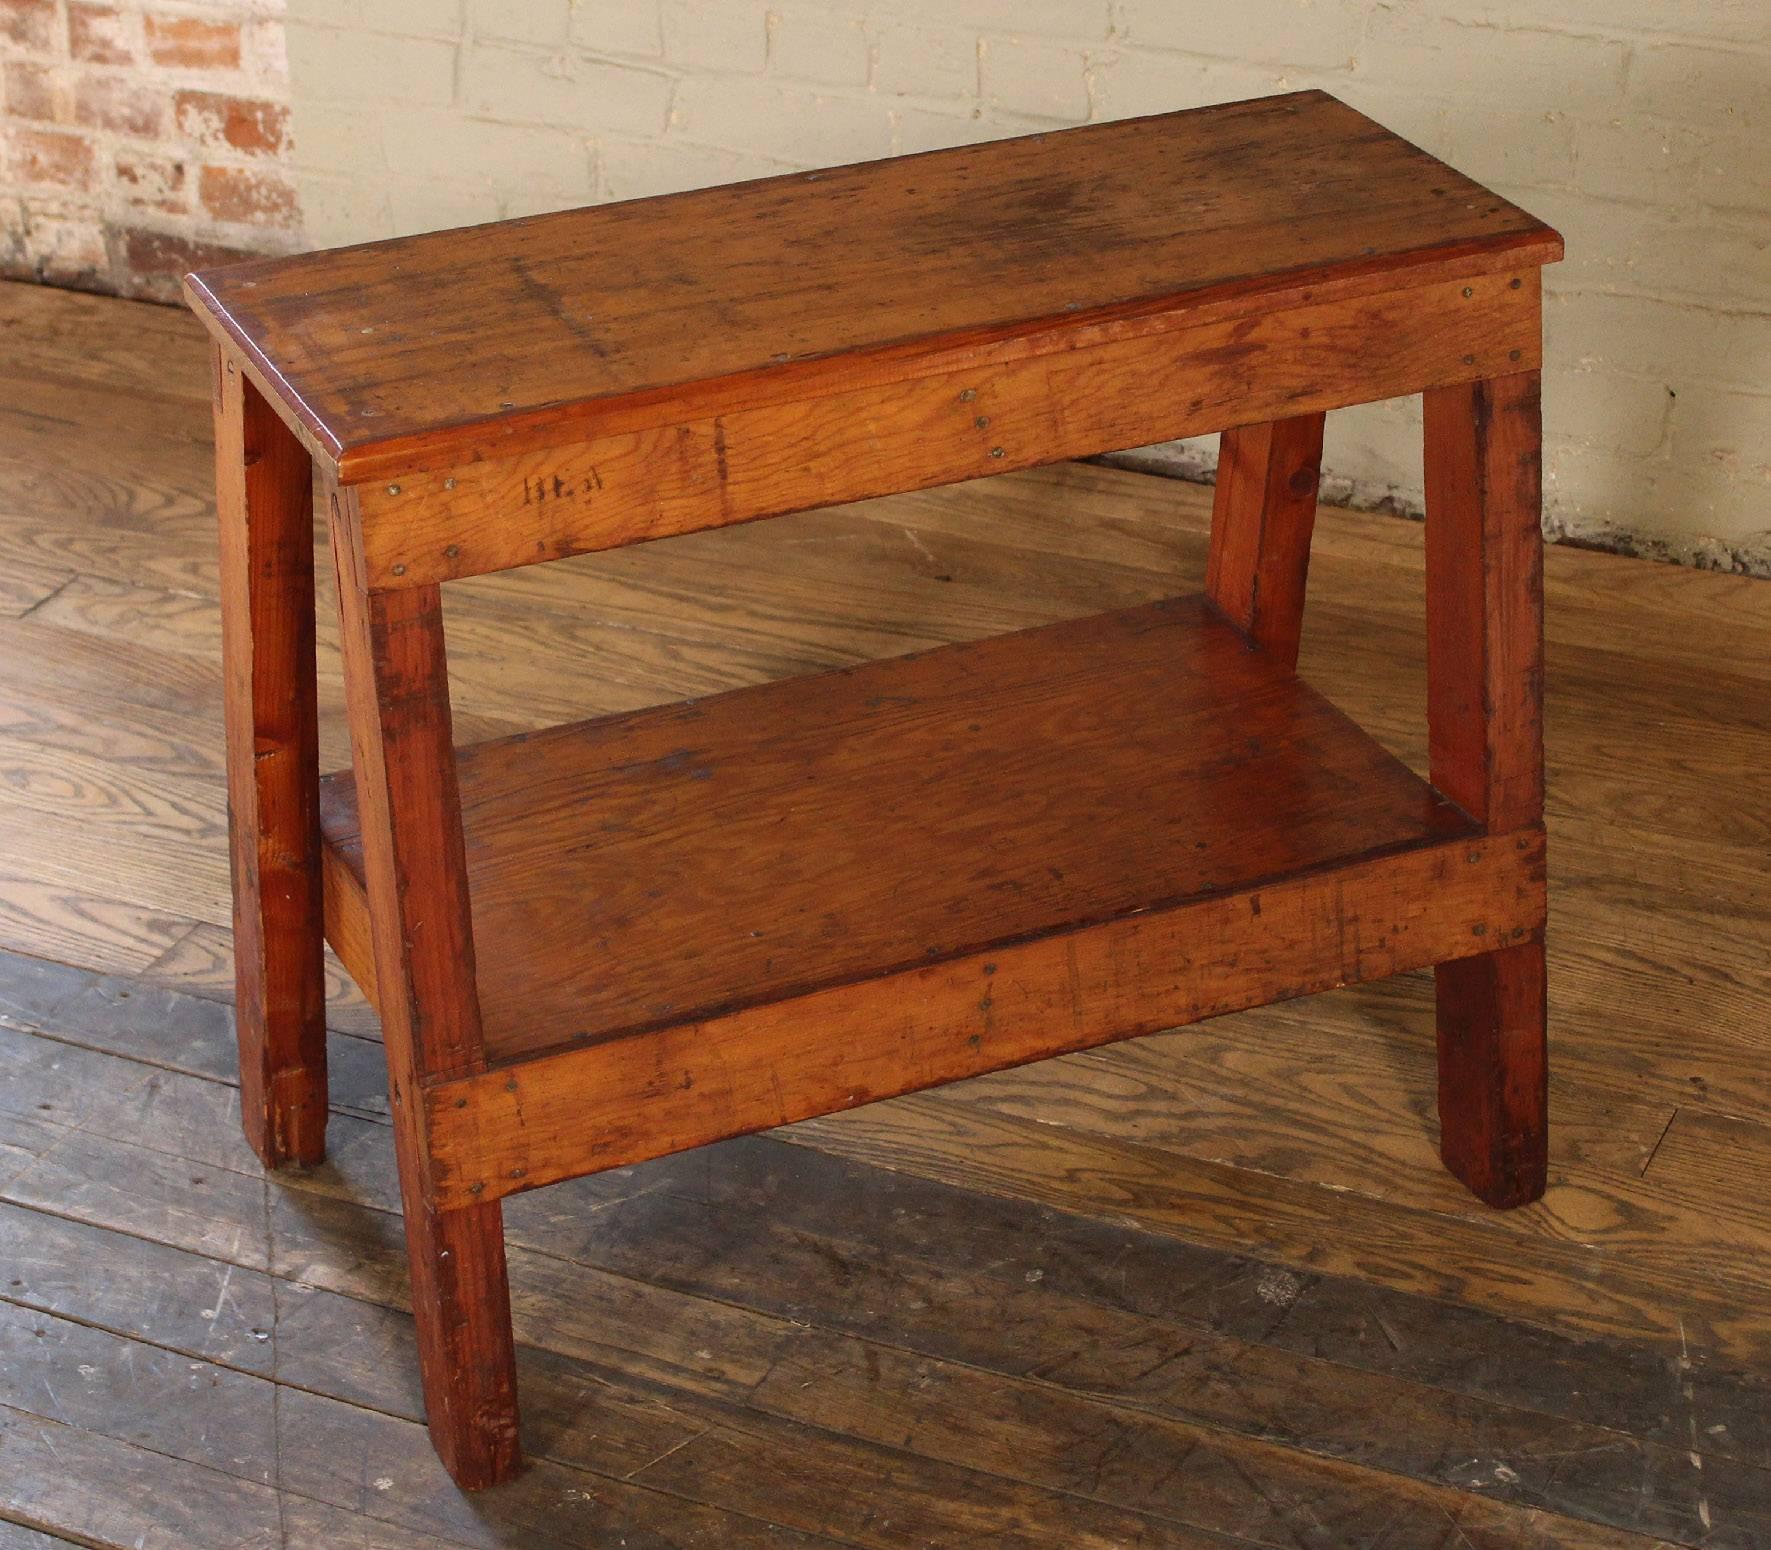 Vintage factory wooden bench, side/end table. Top measures 29" x 11 1/4", overall dimensions are 28" x 16 3/4" x 24 3/8", shelf measures 14 1/4" x 24 7/8" x 10 1/2" in height.